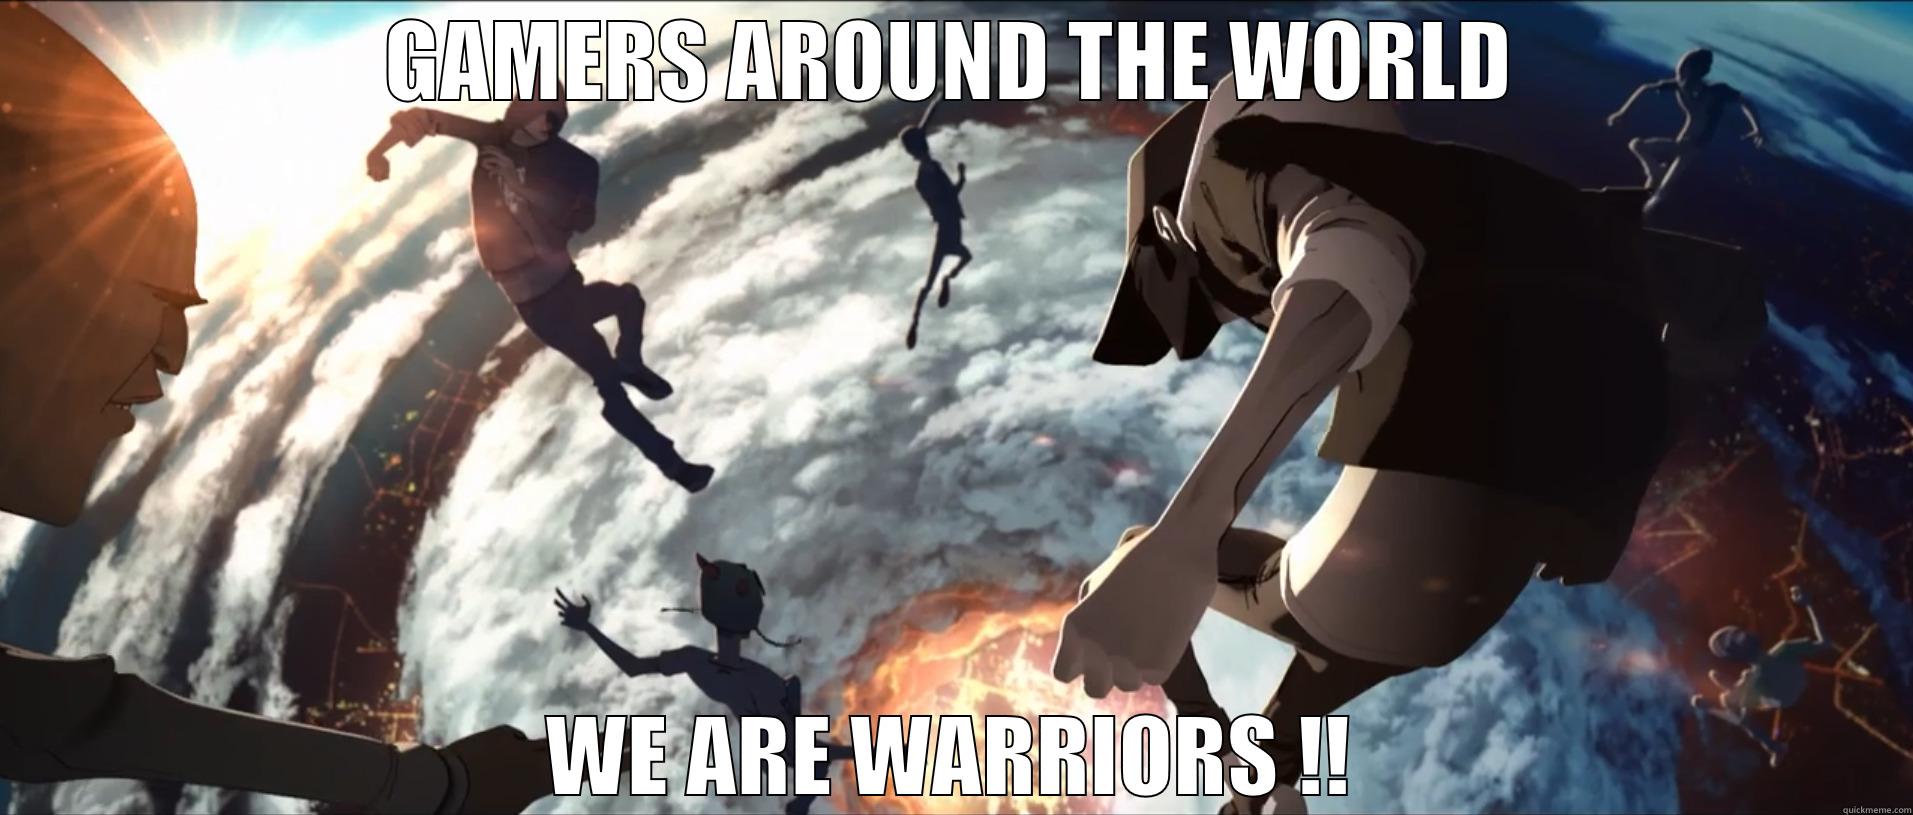 GAMERS AROUND THE WORLD WE ARE WARRIORS !! Misc